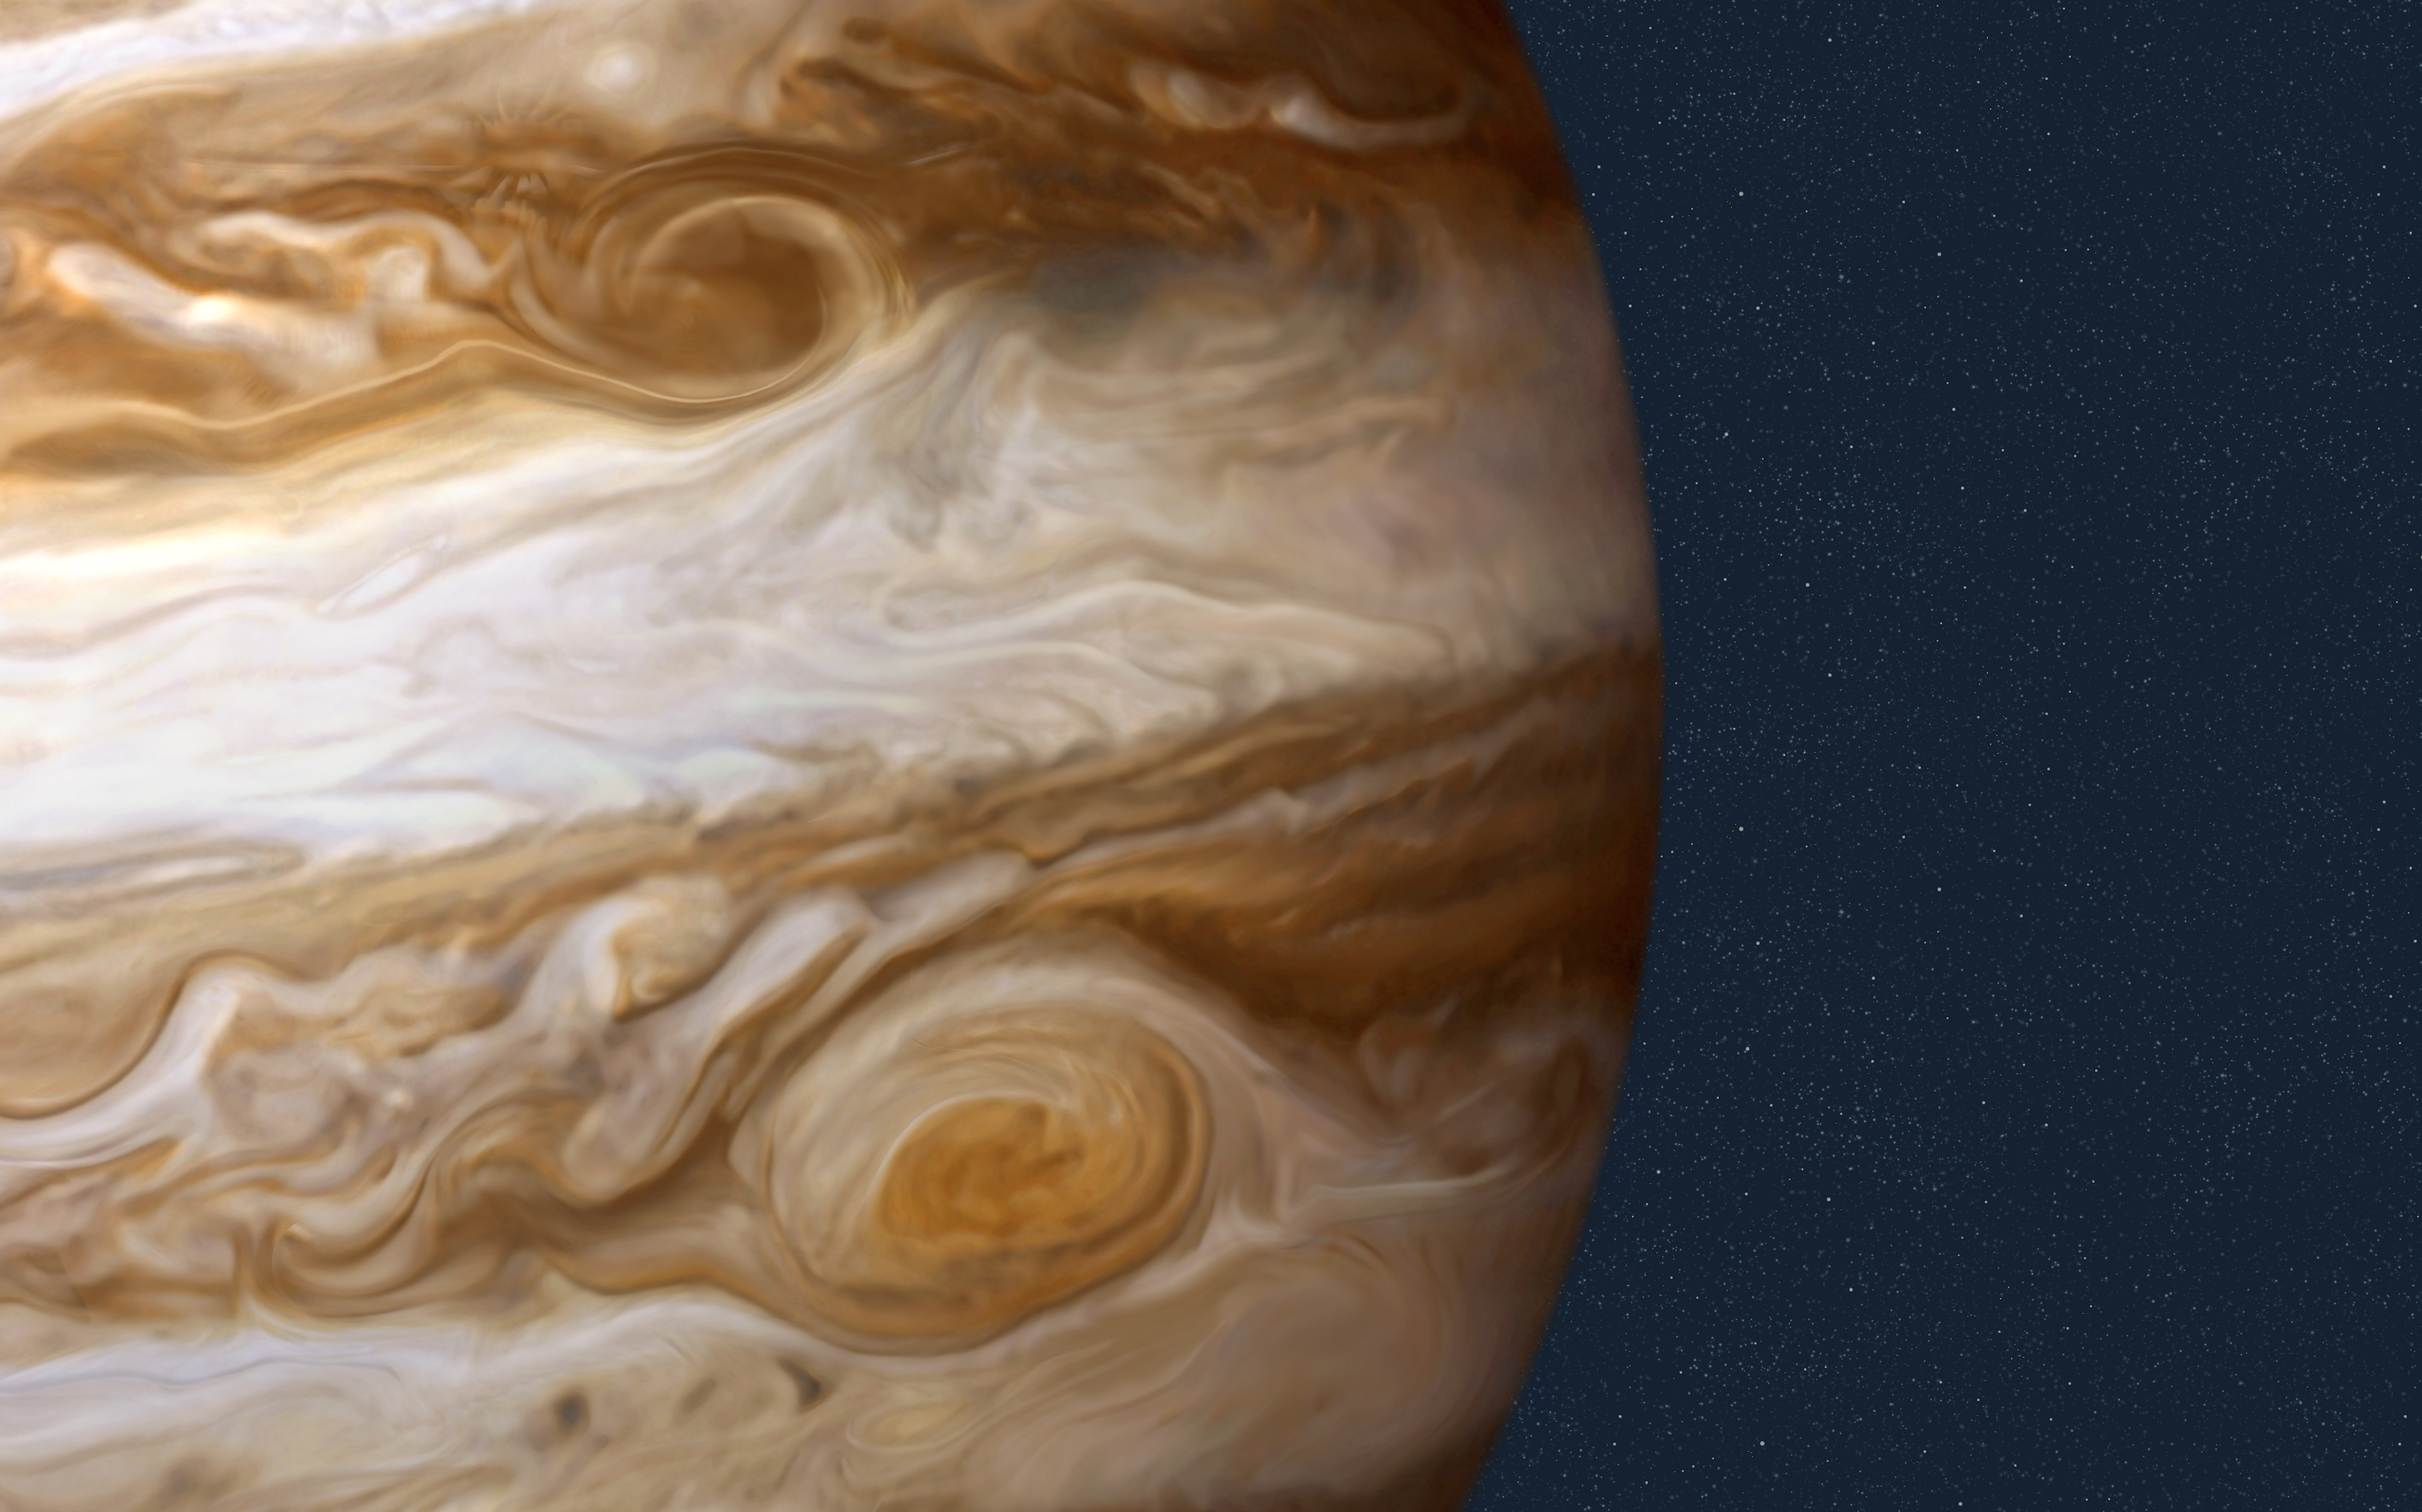 Jupiter, The largest planet in the solar system is 1,400 times the size of Earth, and its mass is 2.5 times that of all of the other planets combined. Jupiter could almost have become a star, since its elements are similar to the SunÍs: 90% hydrogen and 10% helium, with traces of methane, water, ammonia, and rocky dust. (Photo by: QAI Publishing/UIG via Getty Images)